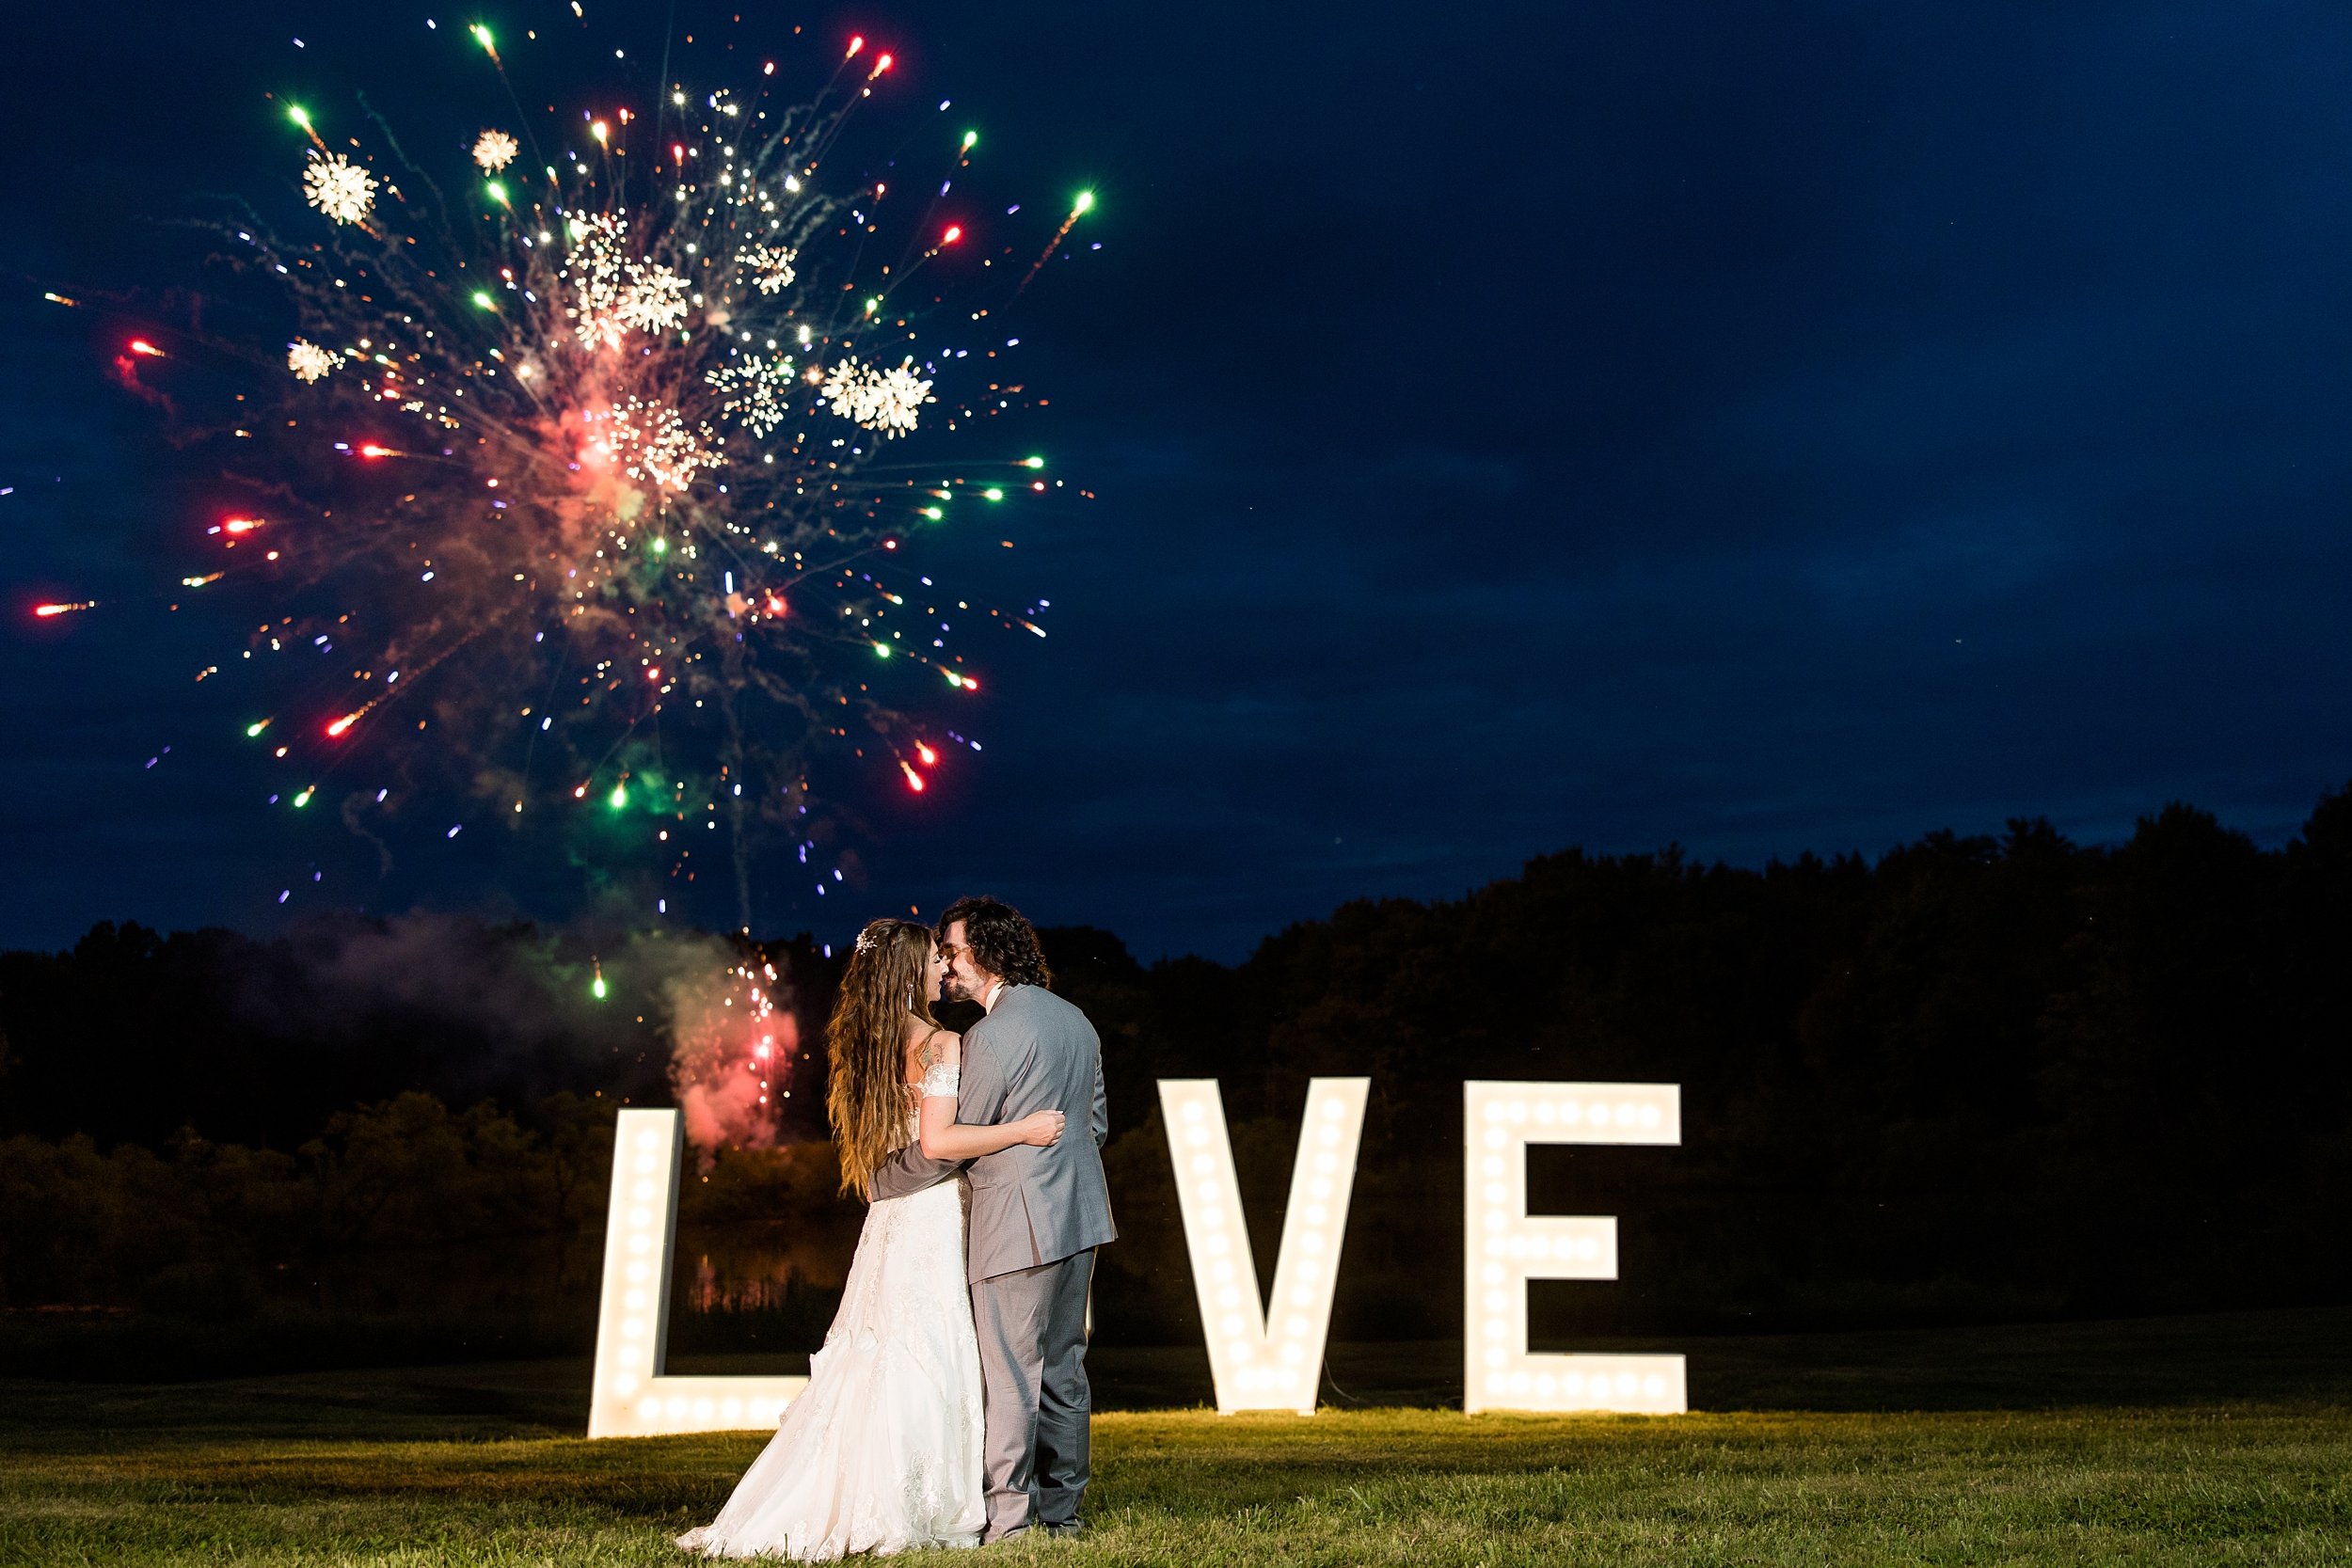  Firework photos have always been a bit tricky for me. I love how these ones turned out! And that “Love” sign?! Adorable! 